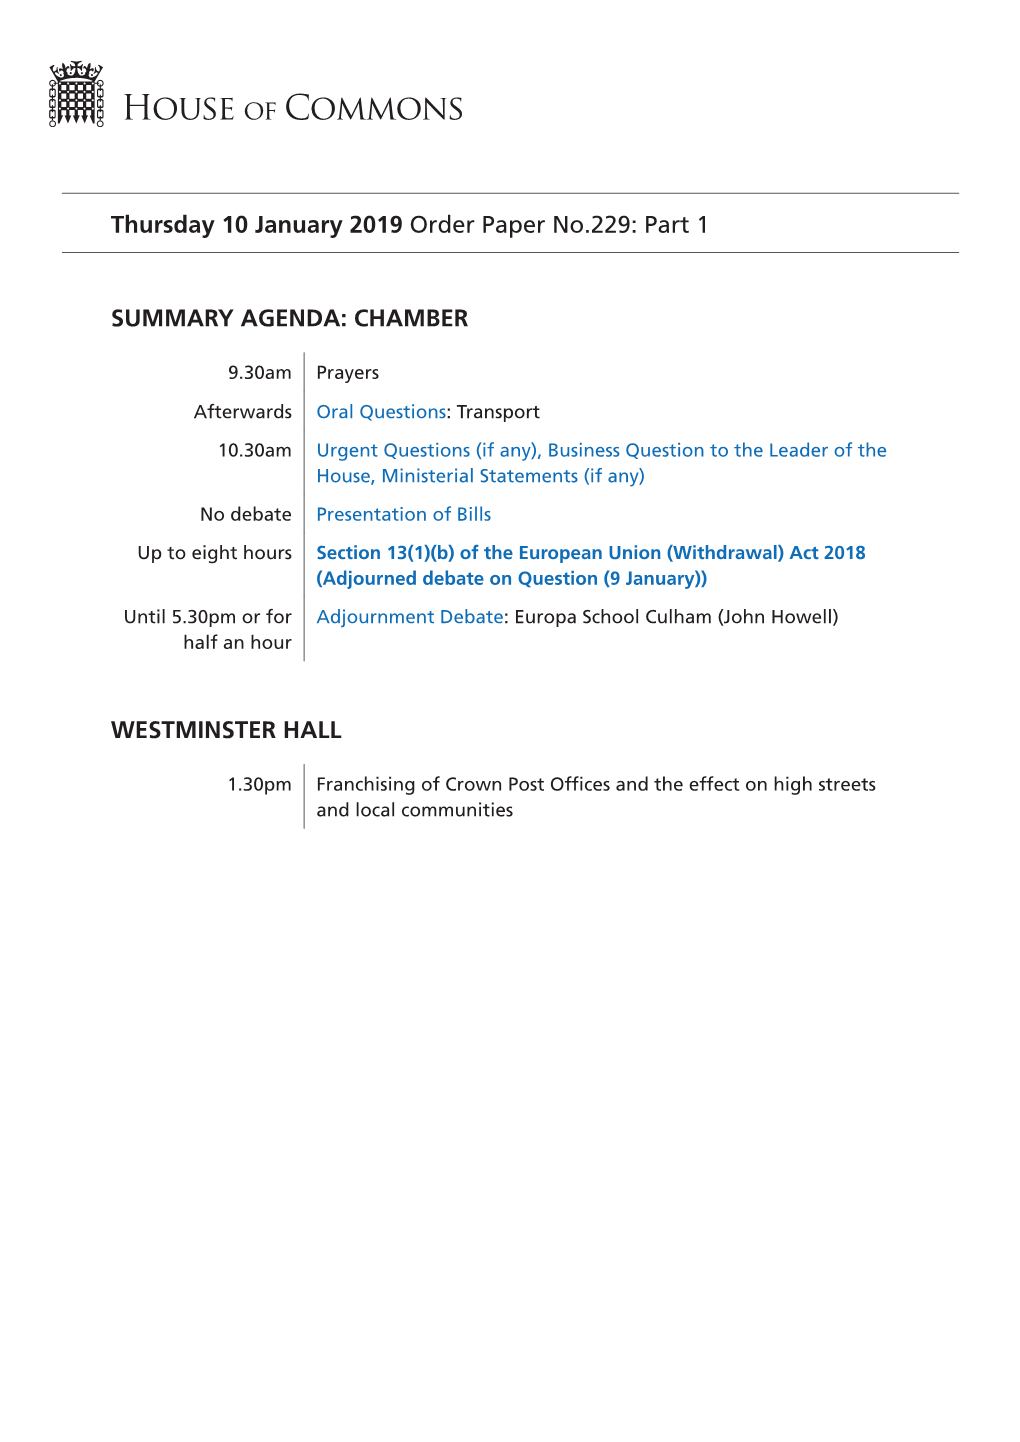 Order Paper for Thu 10 Jan 2019